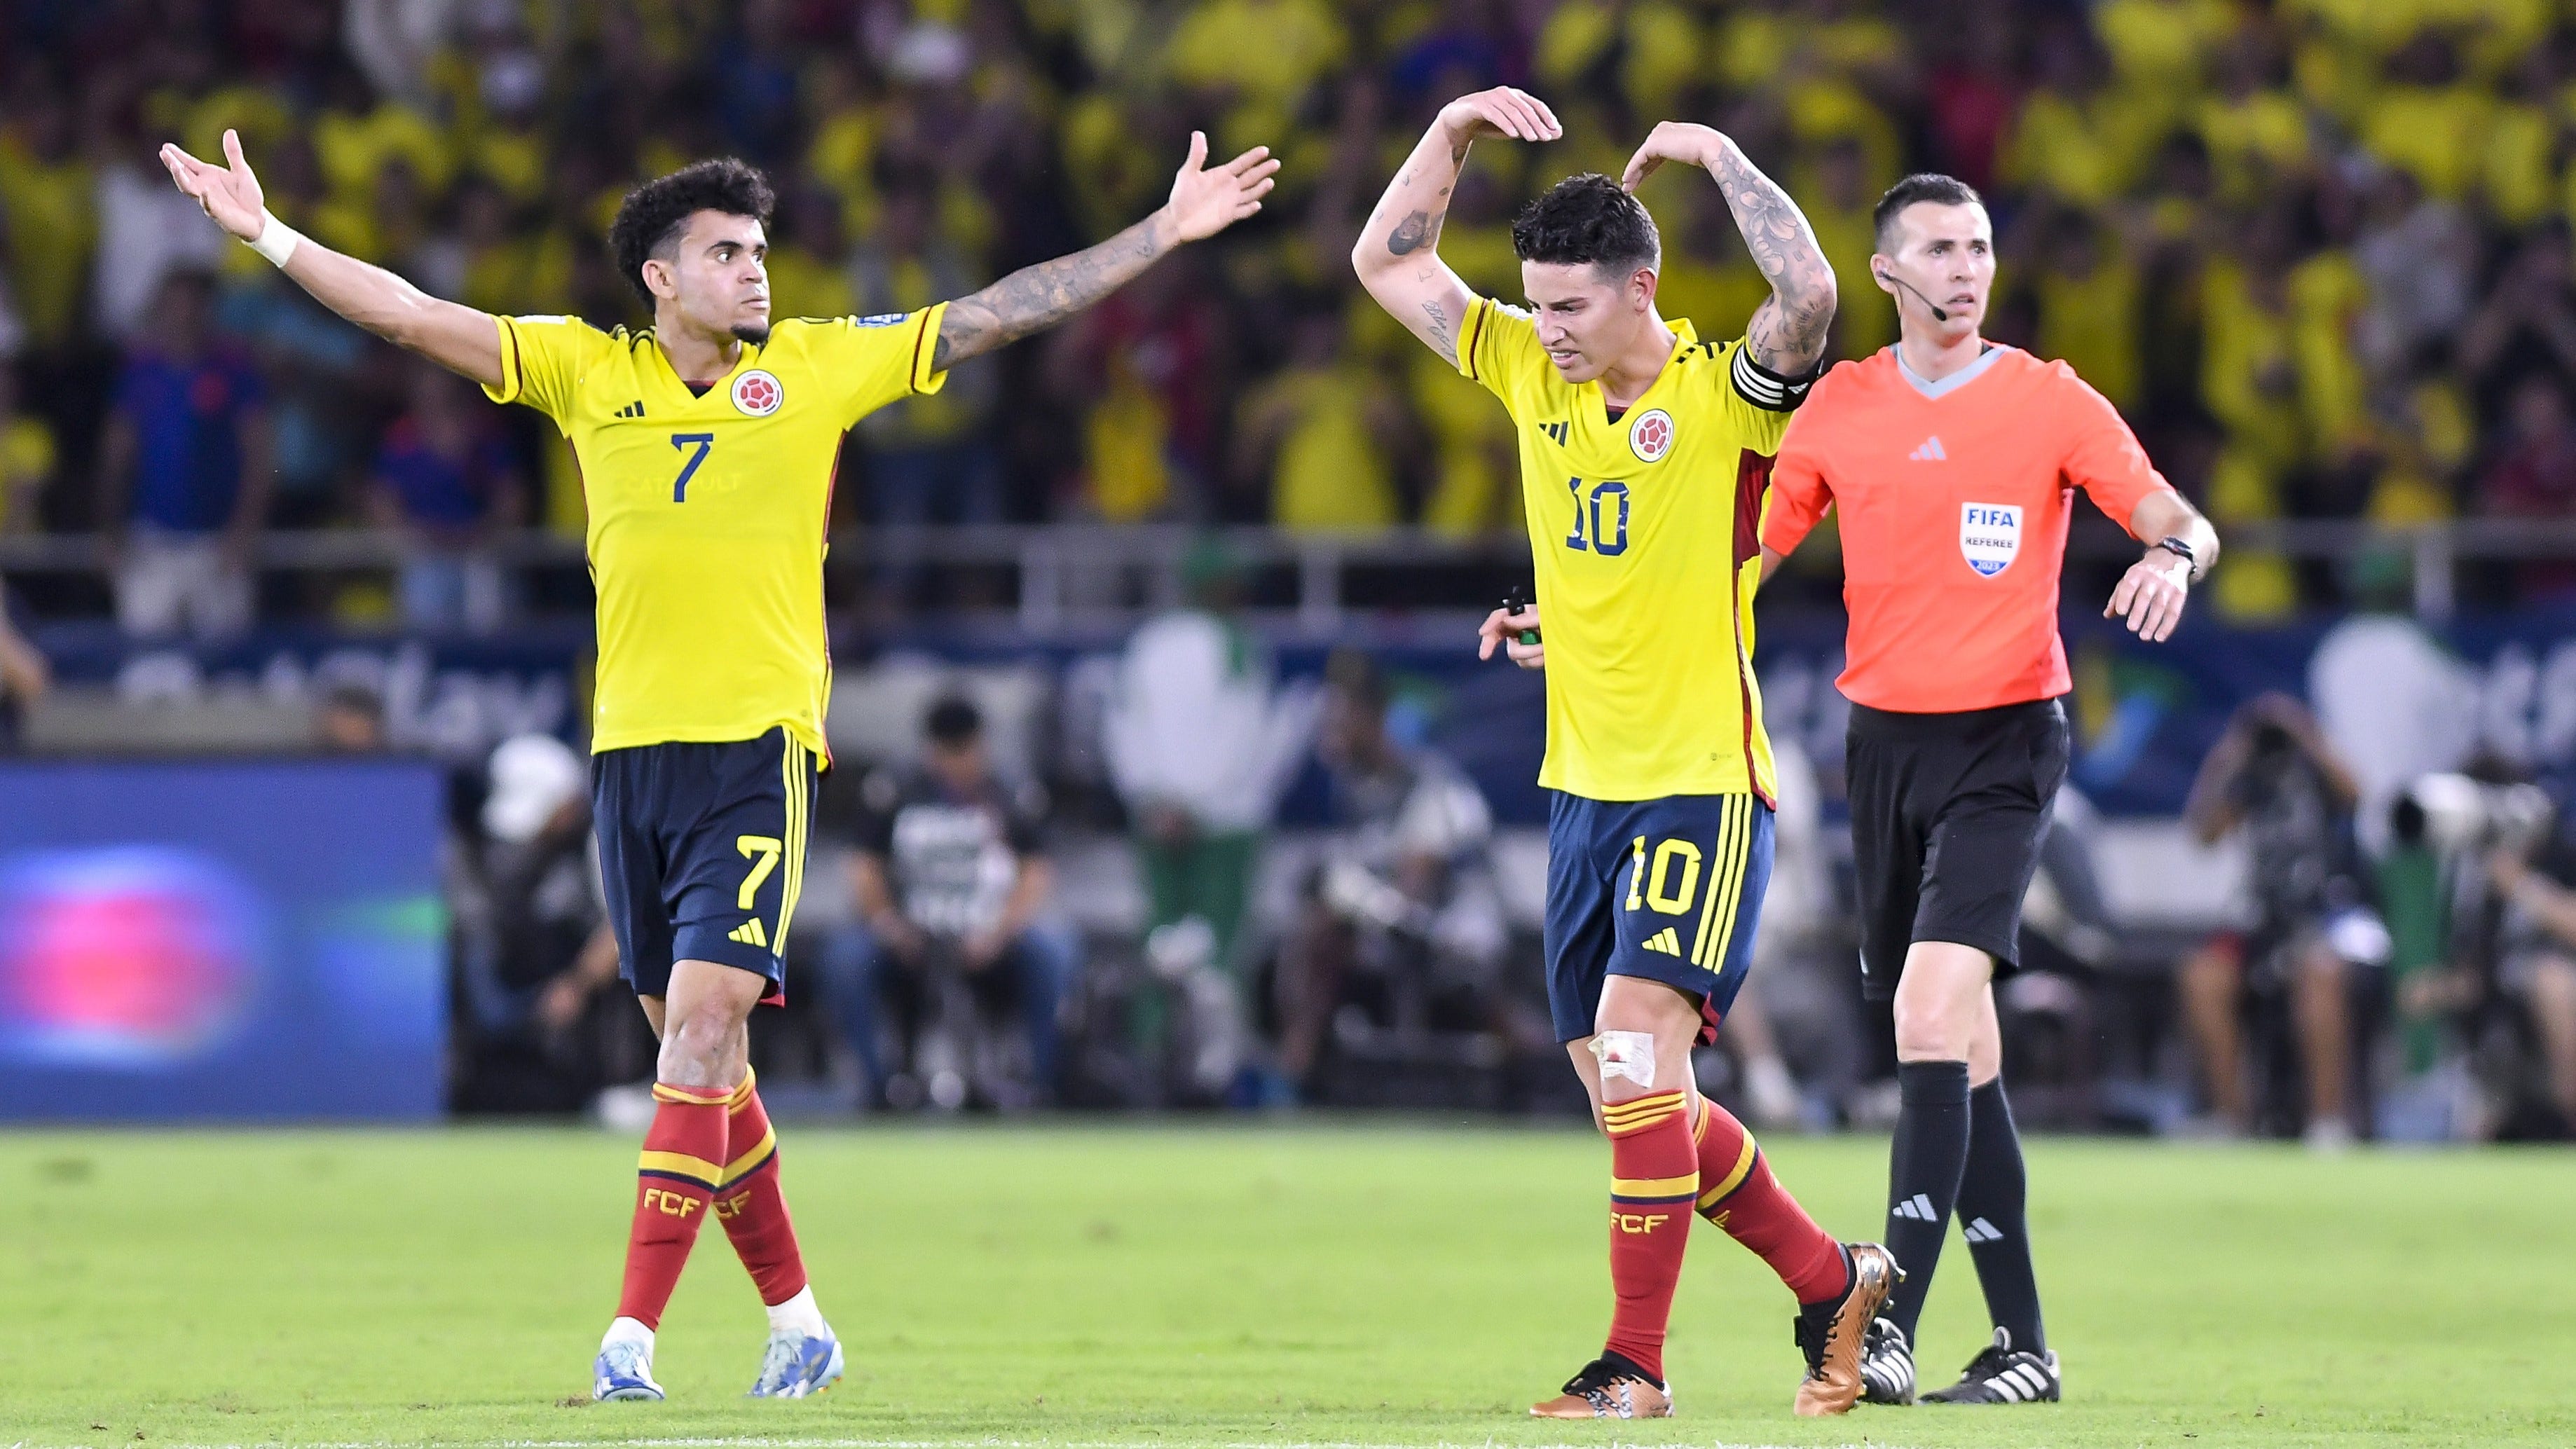 Forget Jogo Bonito - Brazil are a mess! No wins in four, injuries galore  and in managerial flux as Copa America looms